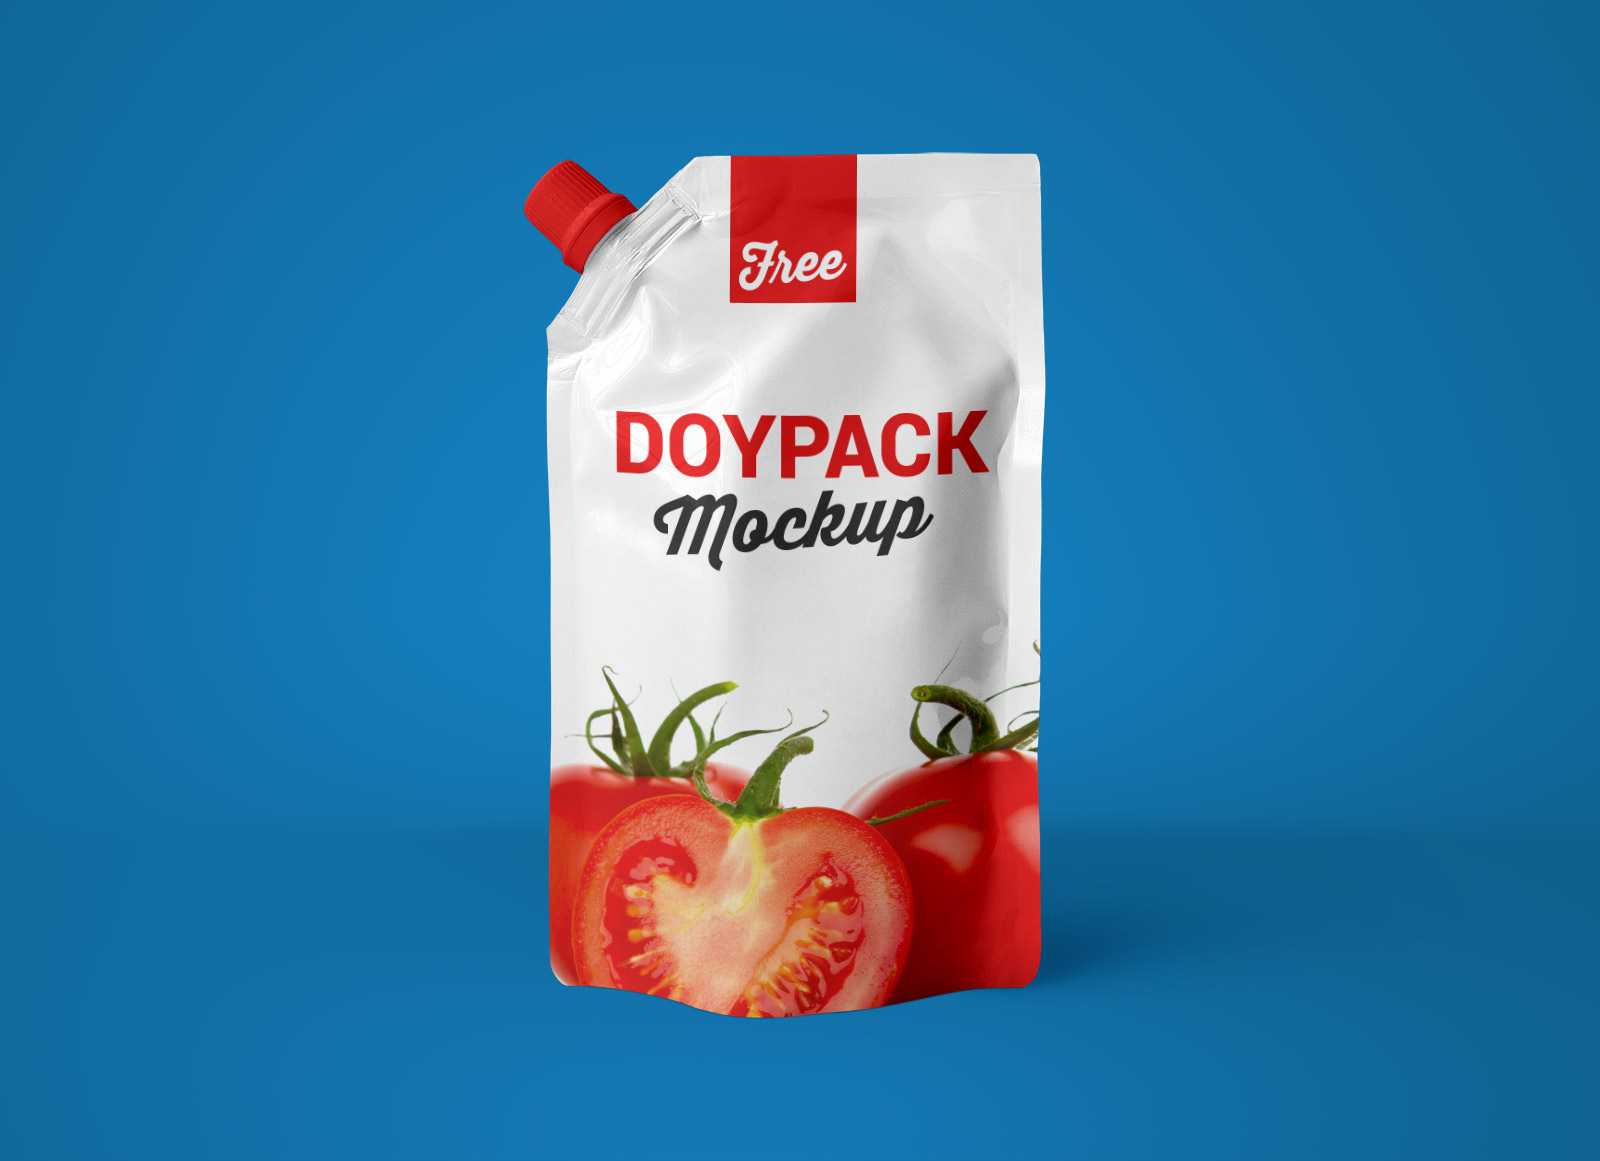 Dypack stand-up pochech emballage mackup